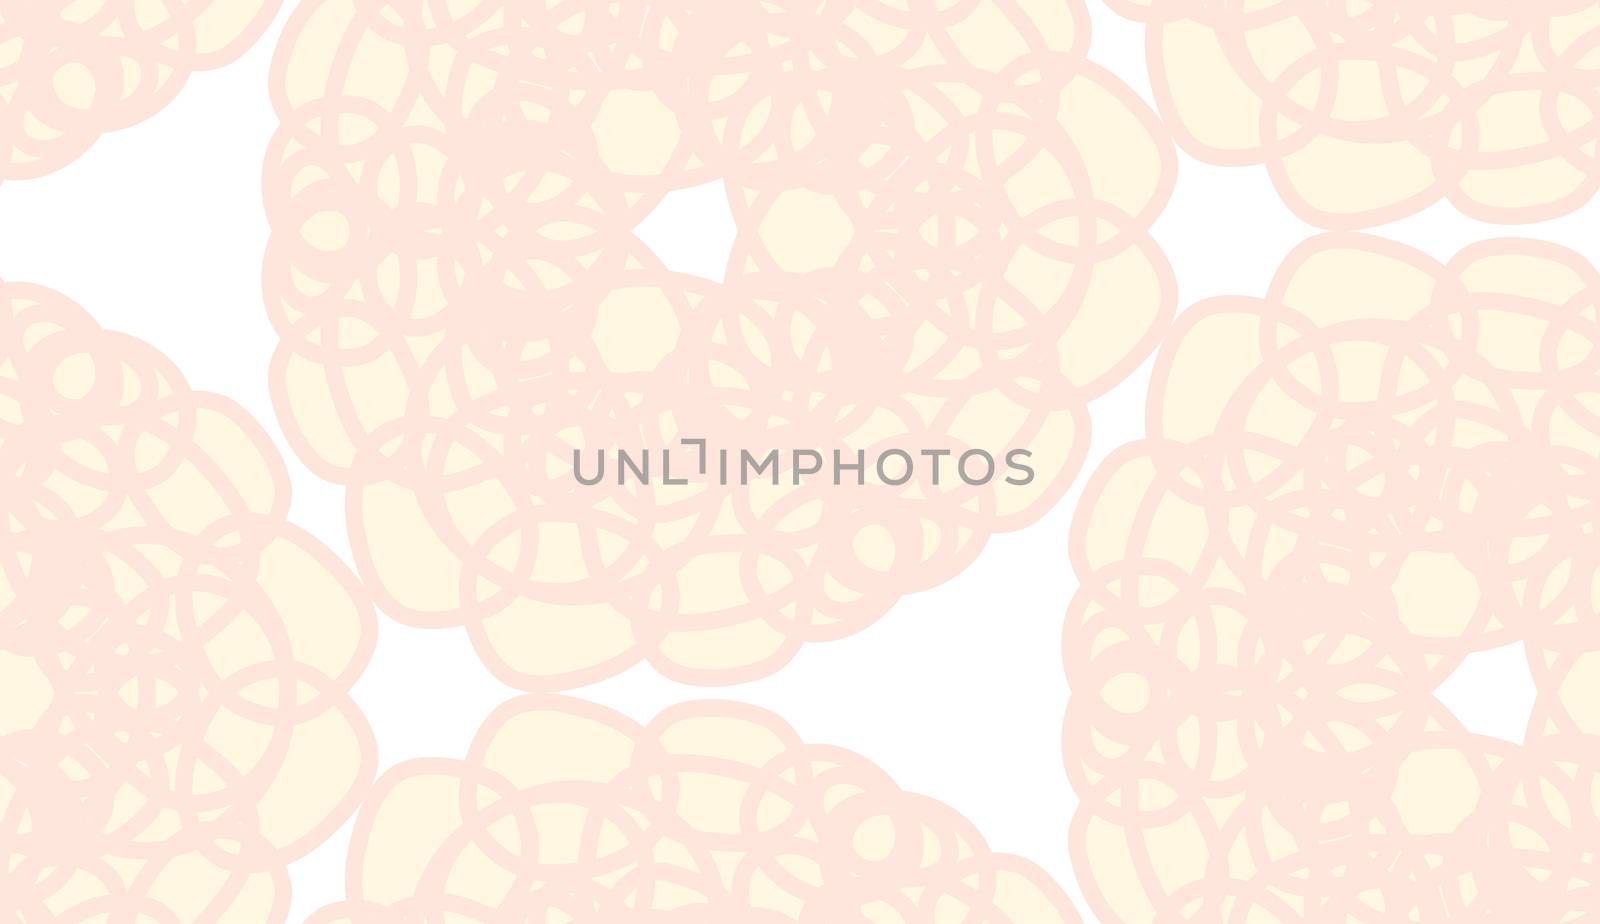 Light brown scribbled circle shapes in form of flowers as repeating background pattern